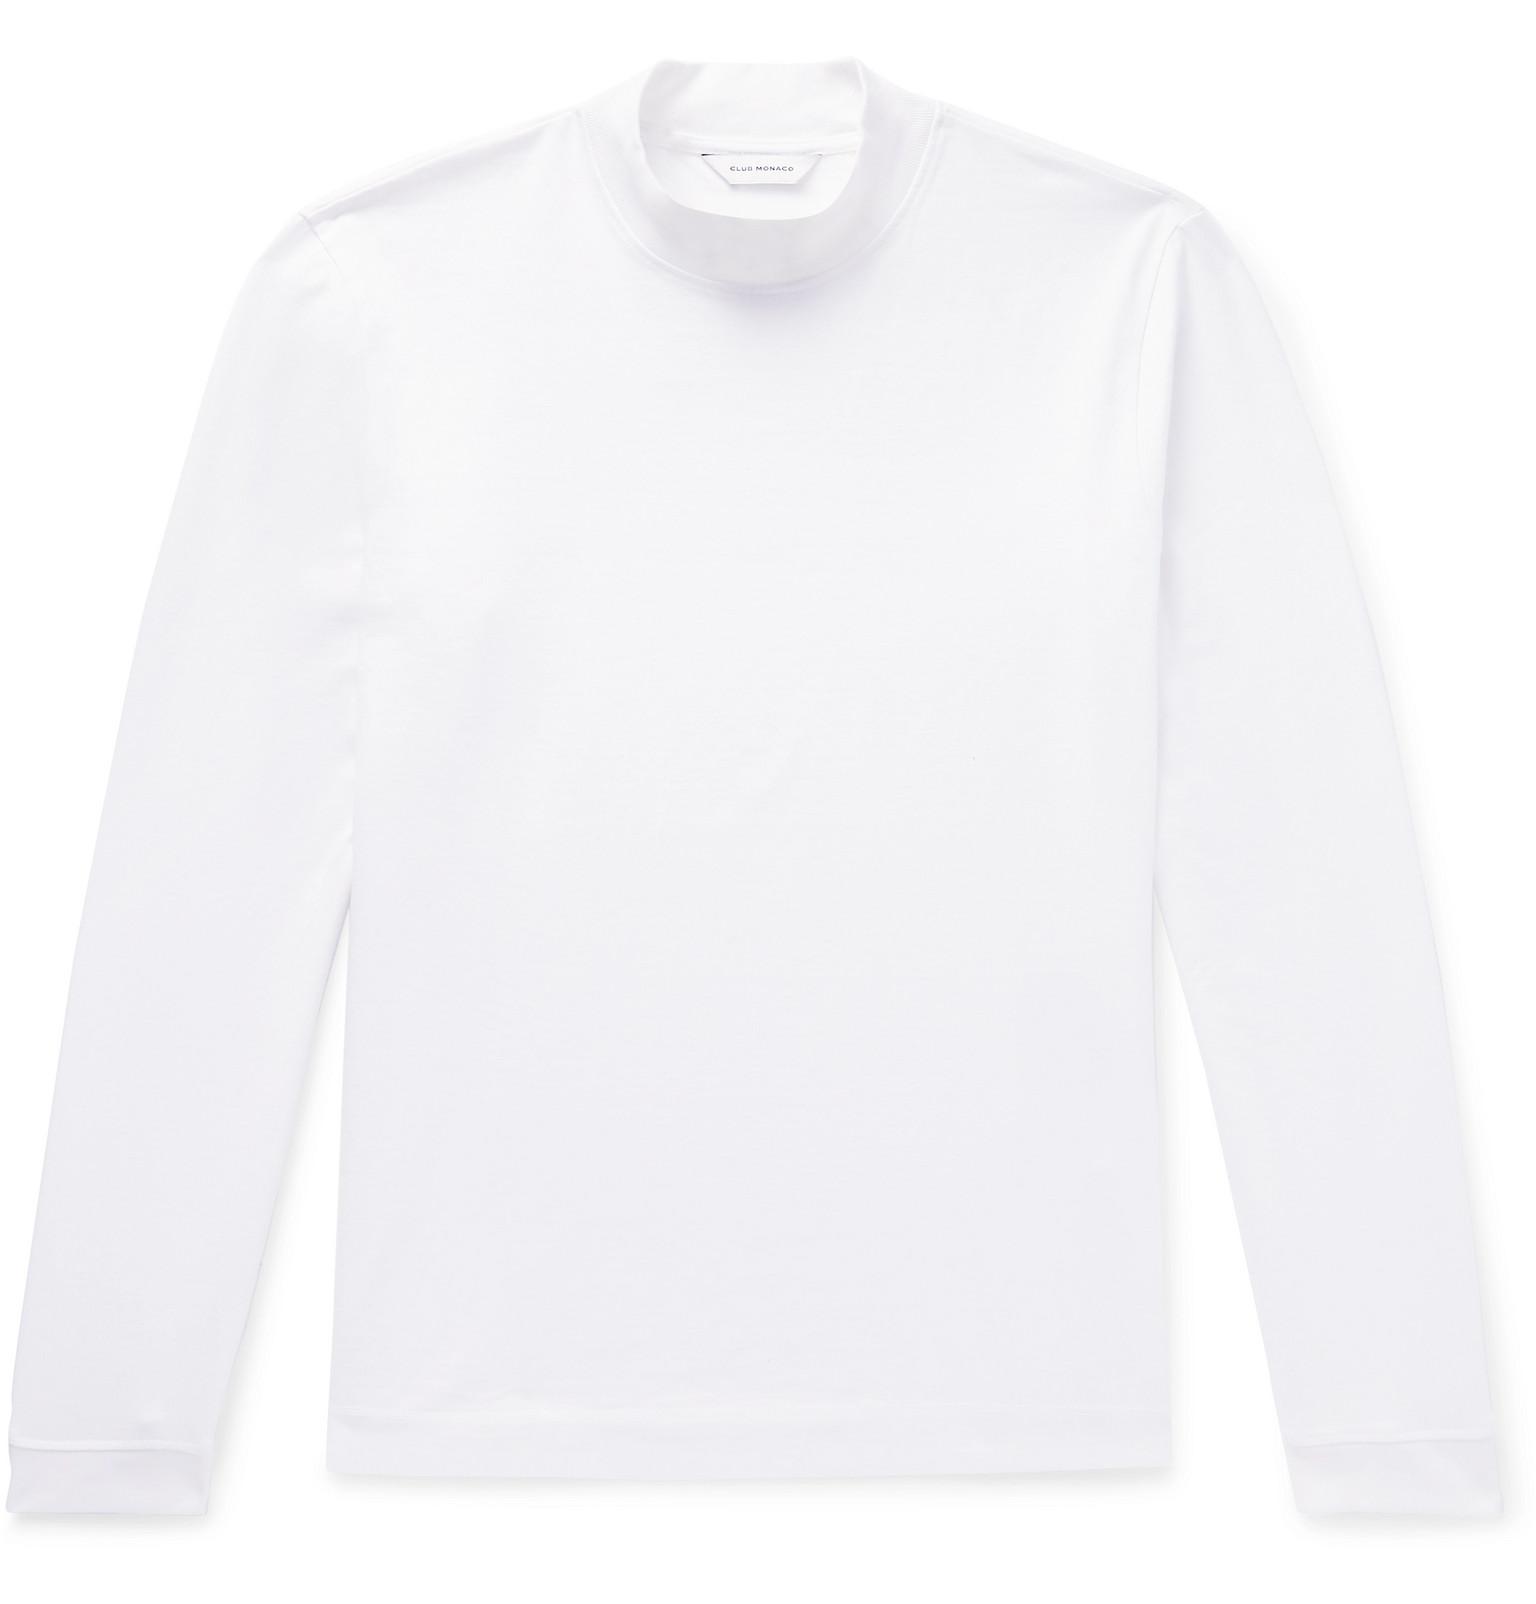 Download Club Monaco Cotton-jersey Mock Neck T-shirt in White for ...